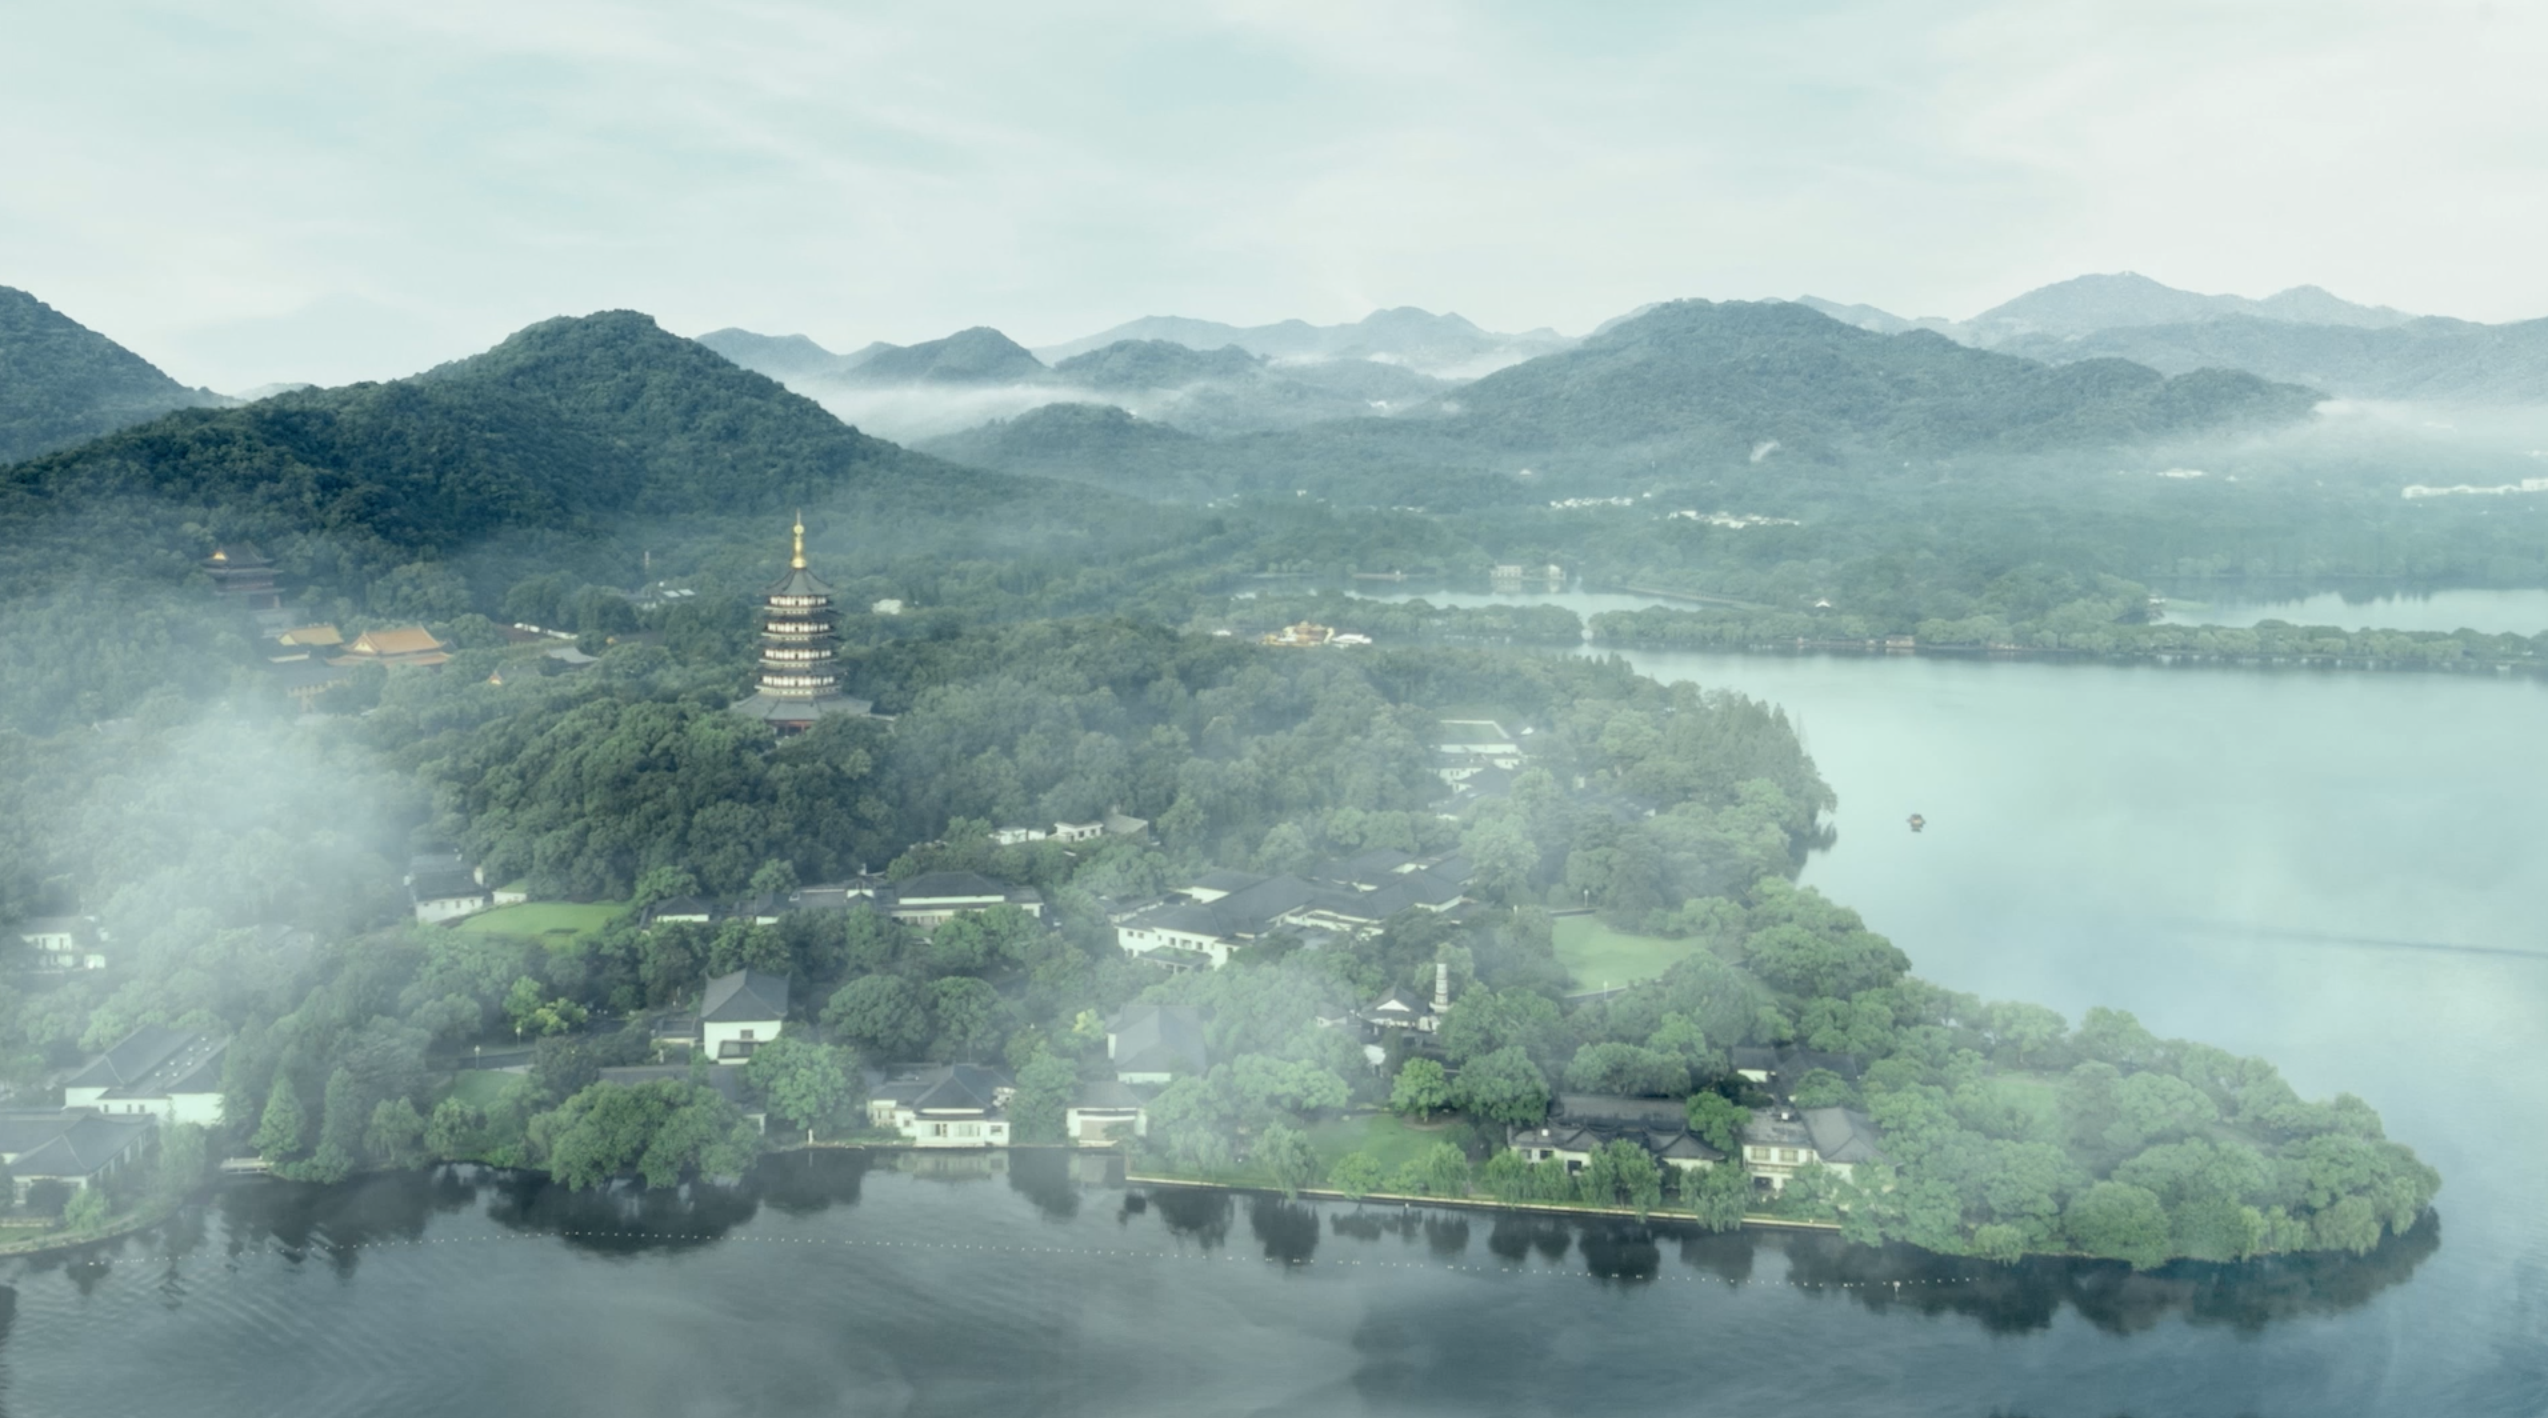 Hangzhou: From the past into the future | Promo